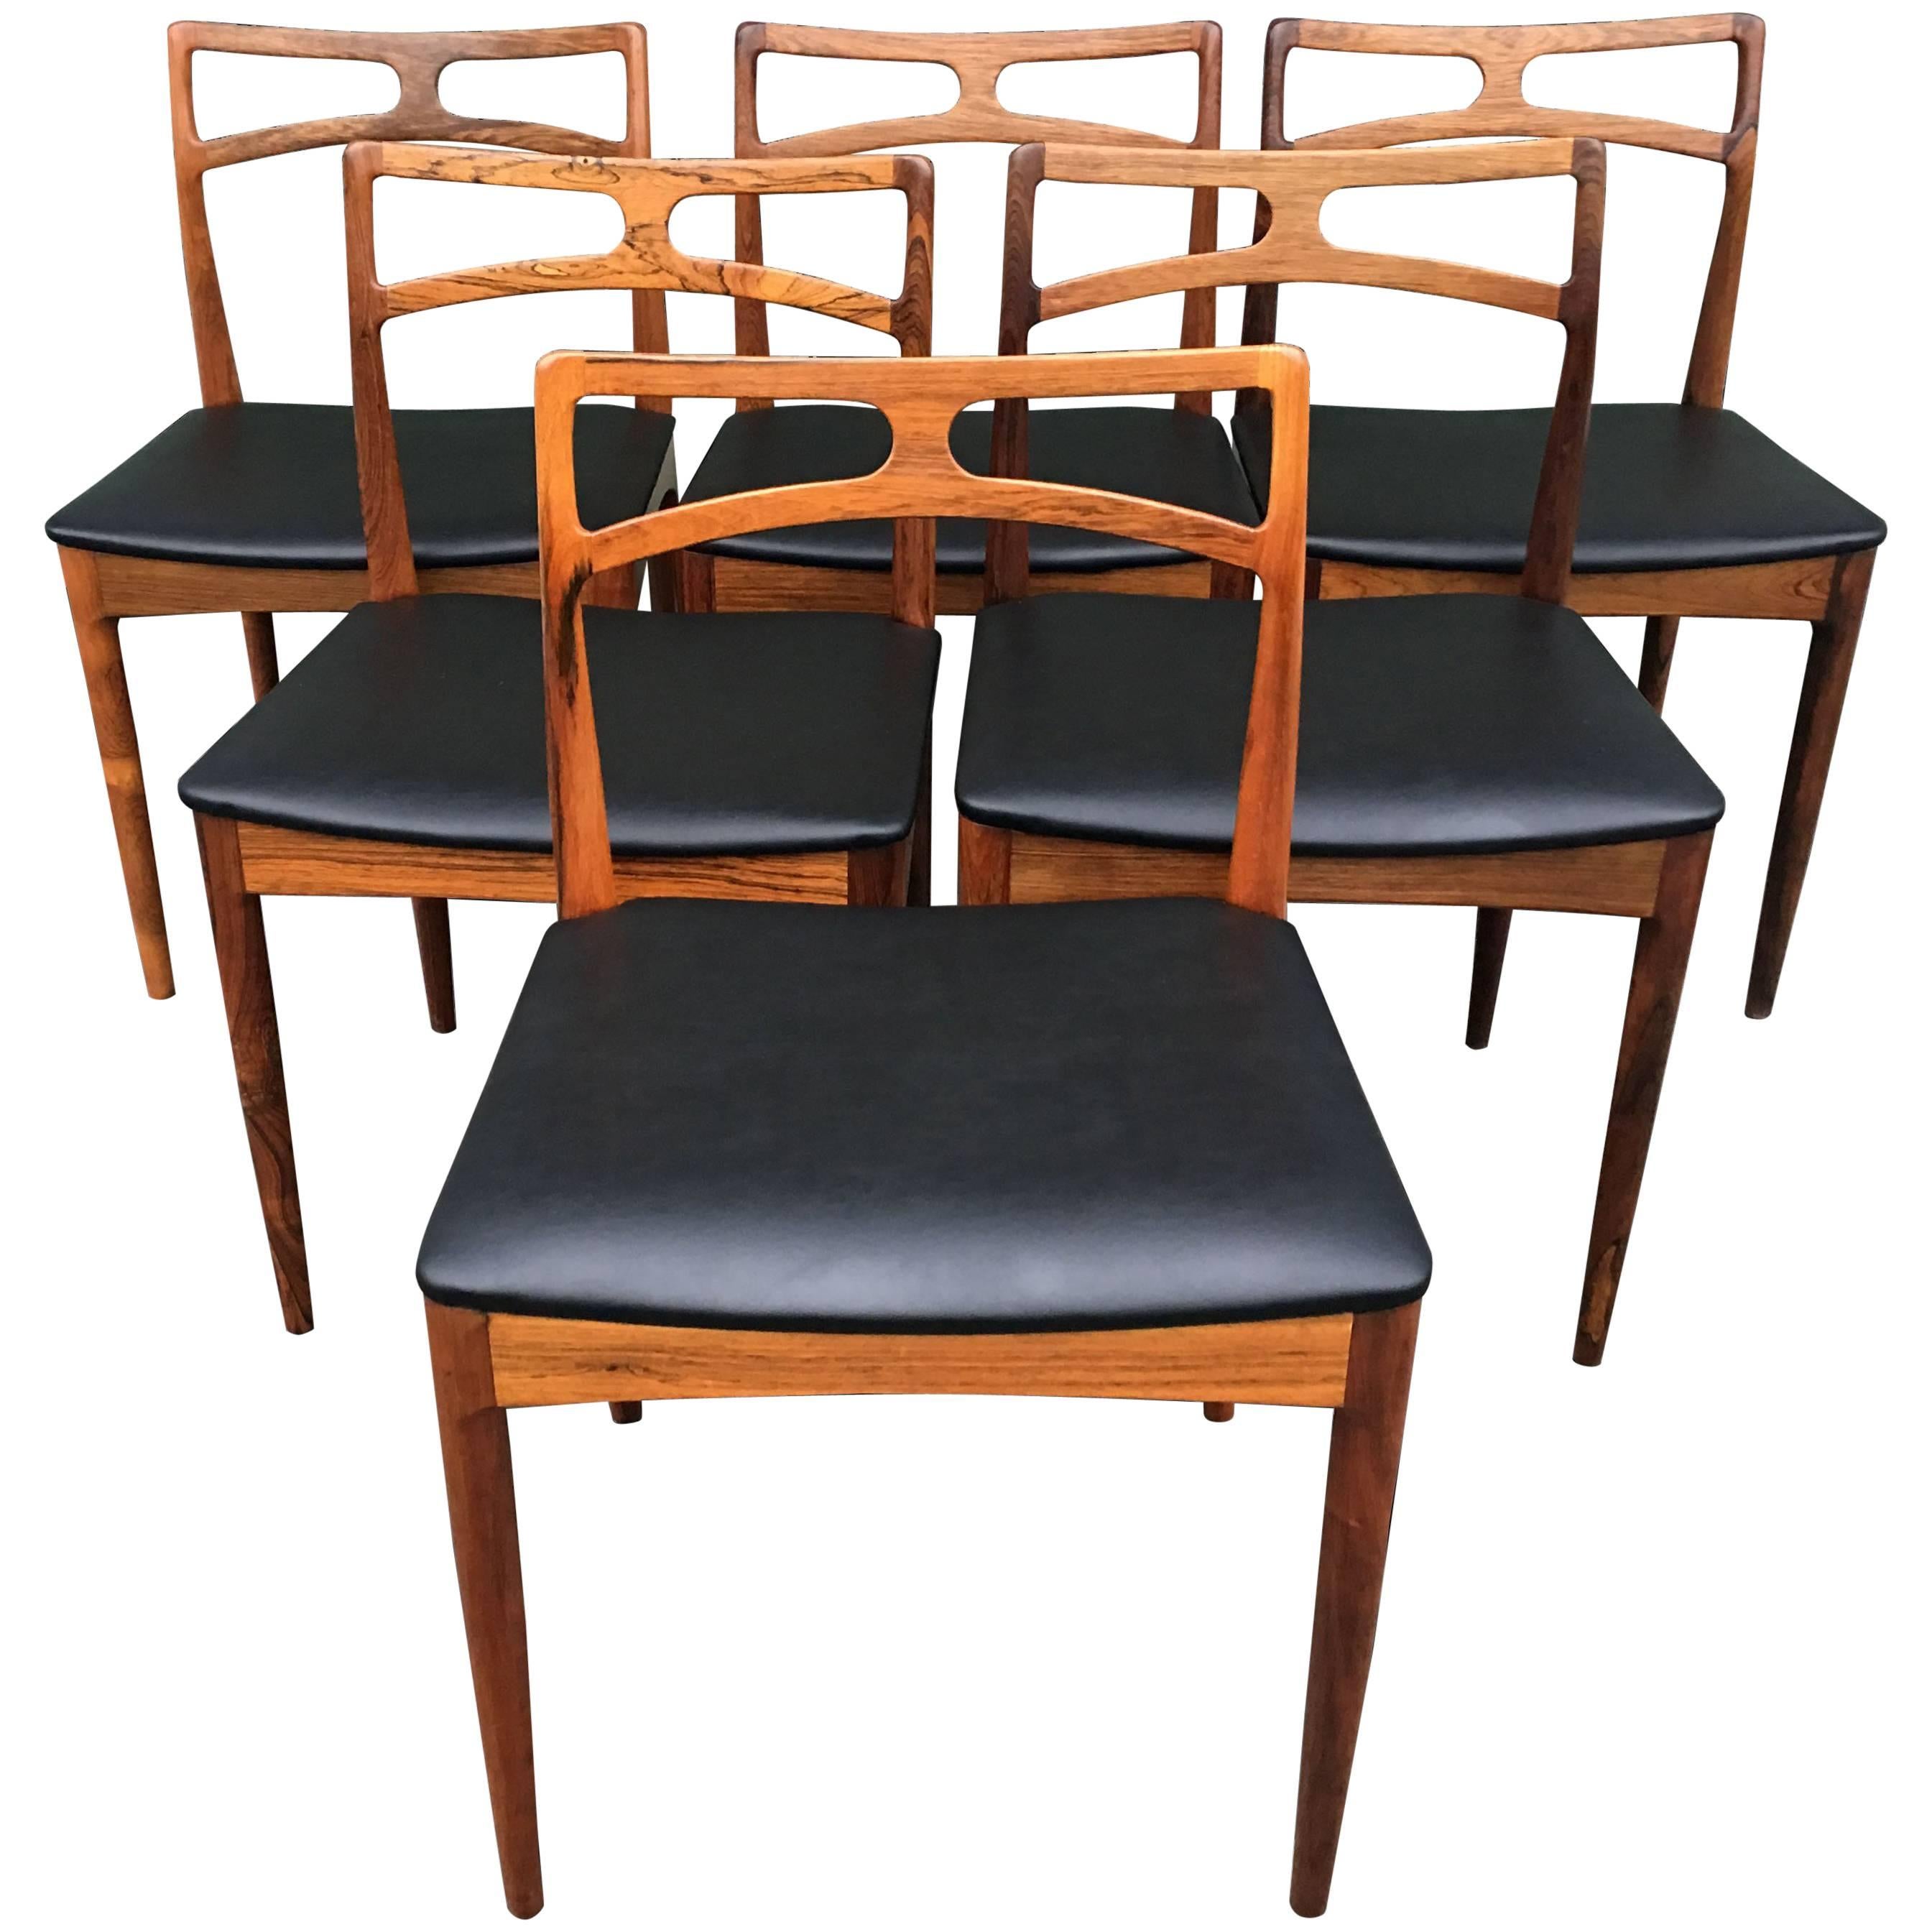 Six Danish Rosewood Dining Chairs by Johannes Andersen for Christian Linnerberg